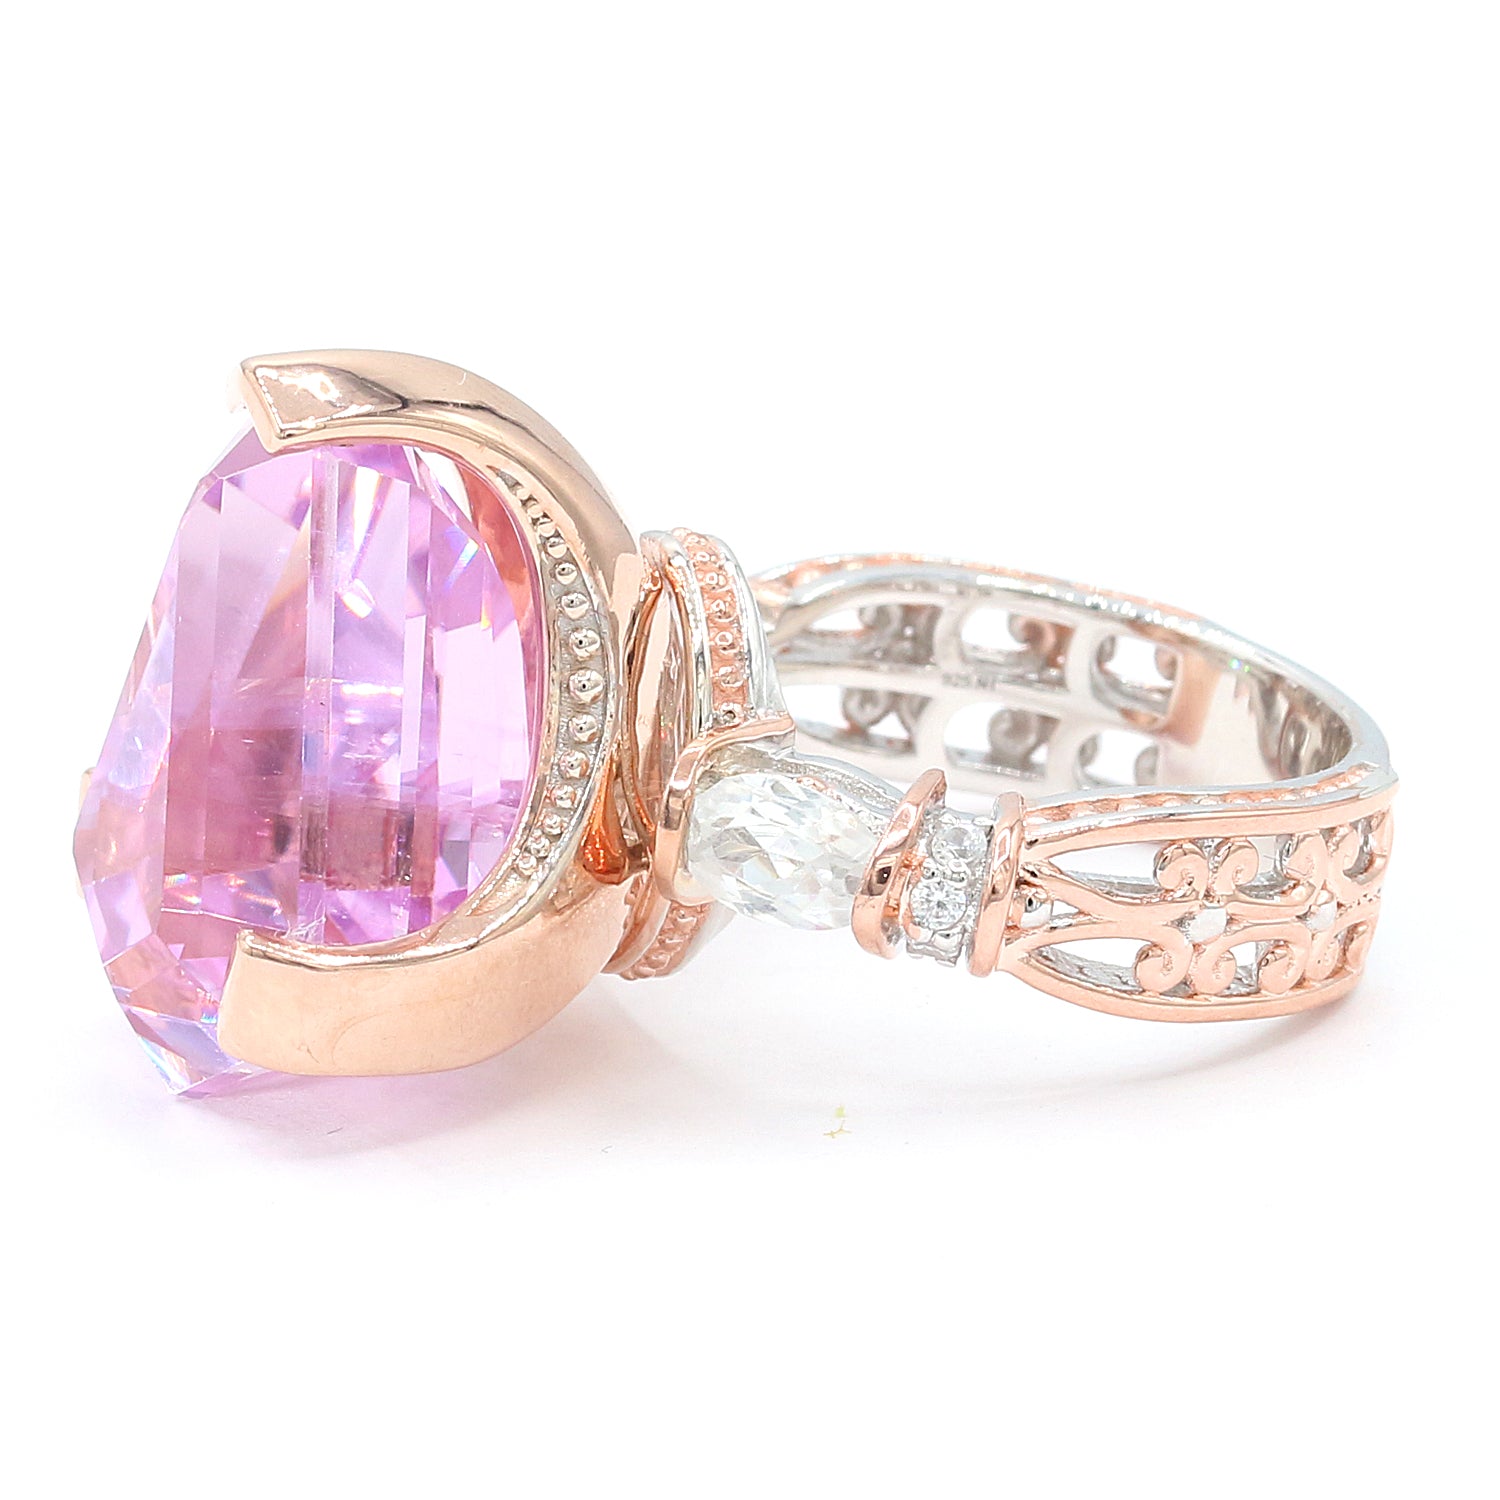 Limited Edition Gems en Vogue Luxe One-of-a-Kind 21.36ctw Shield Cut Kunzite & White Zircon Ring